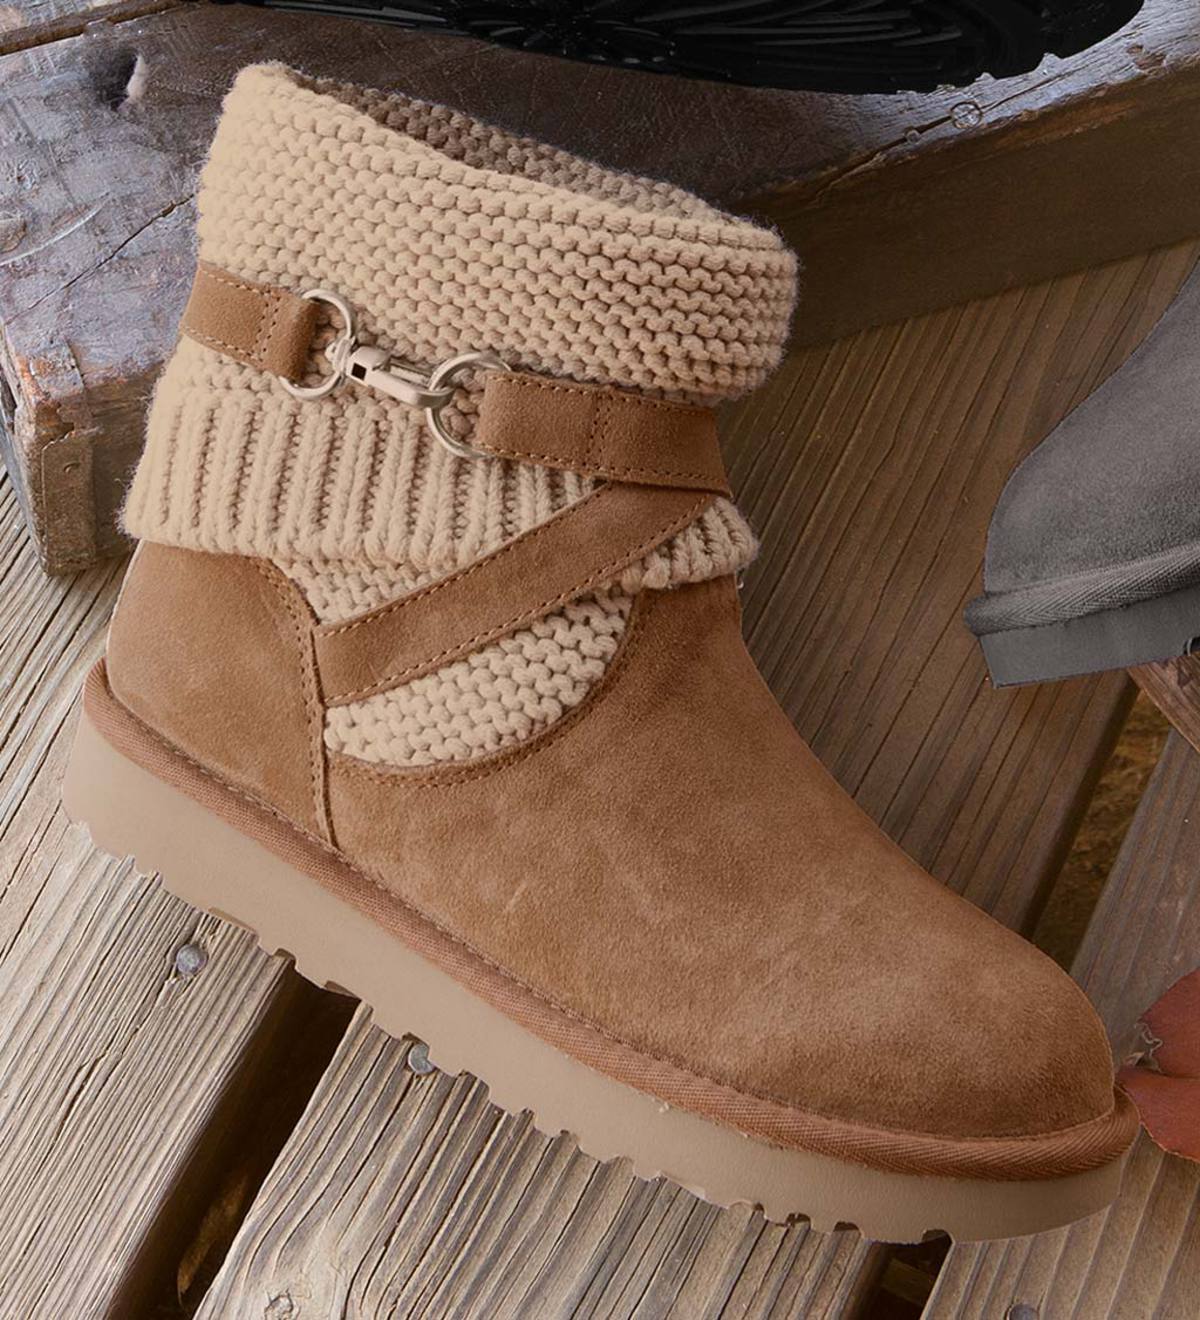 ugg boots with straps